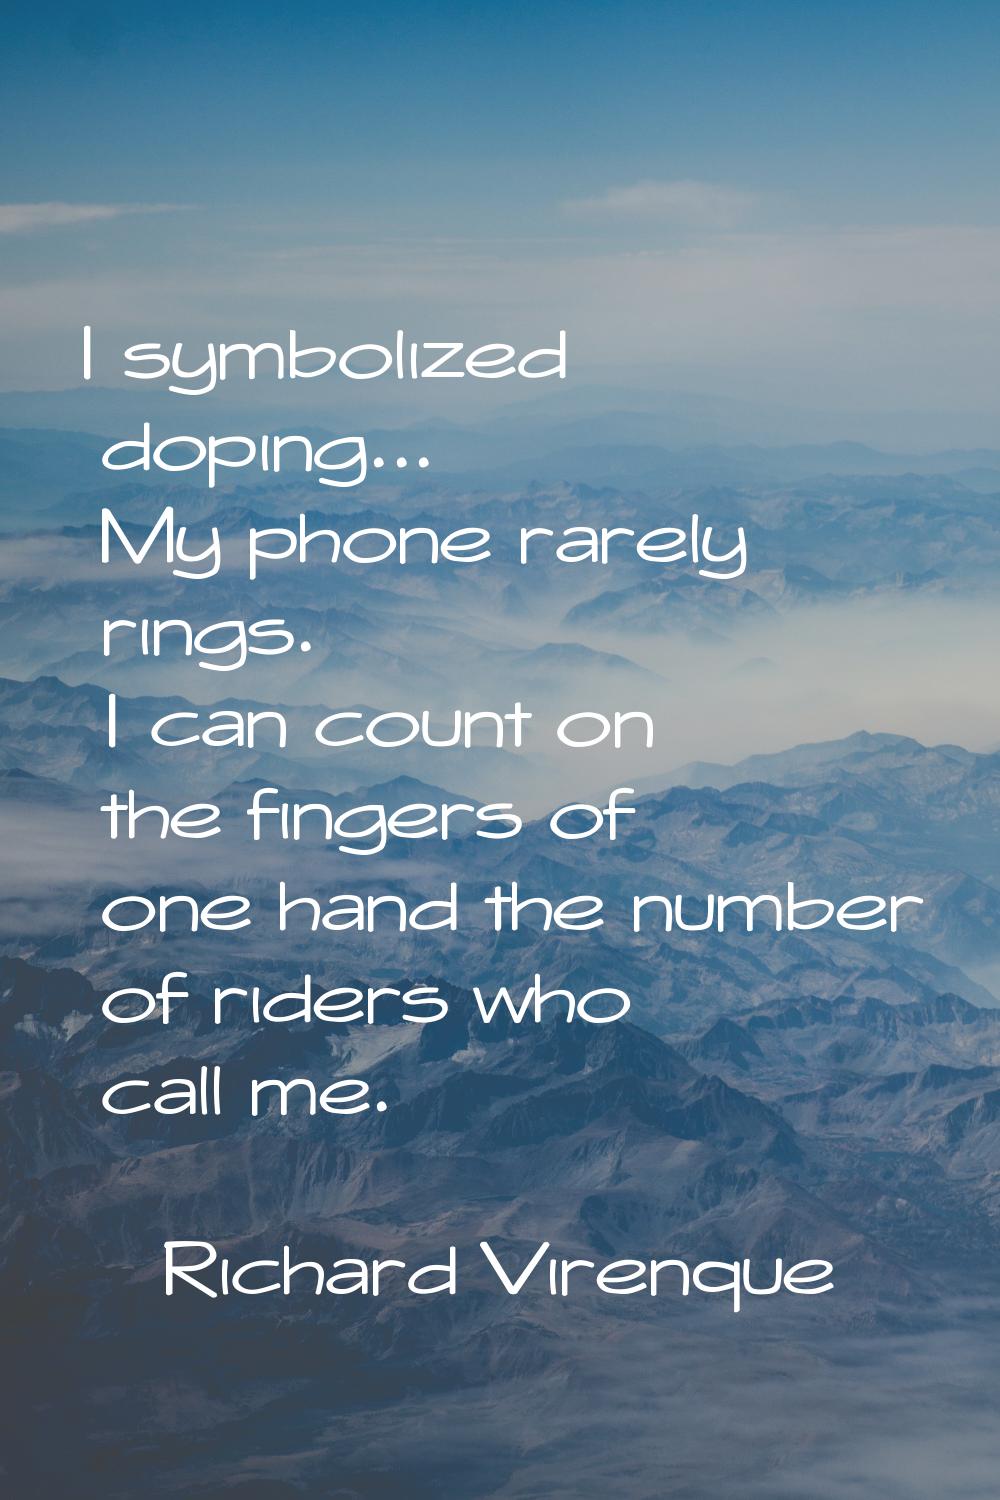 I symbolized doping... My phone rarely rings. I can count on the fingers of one hand the number of 